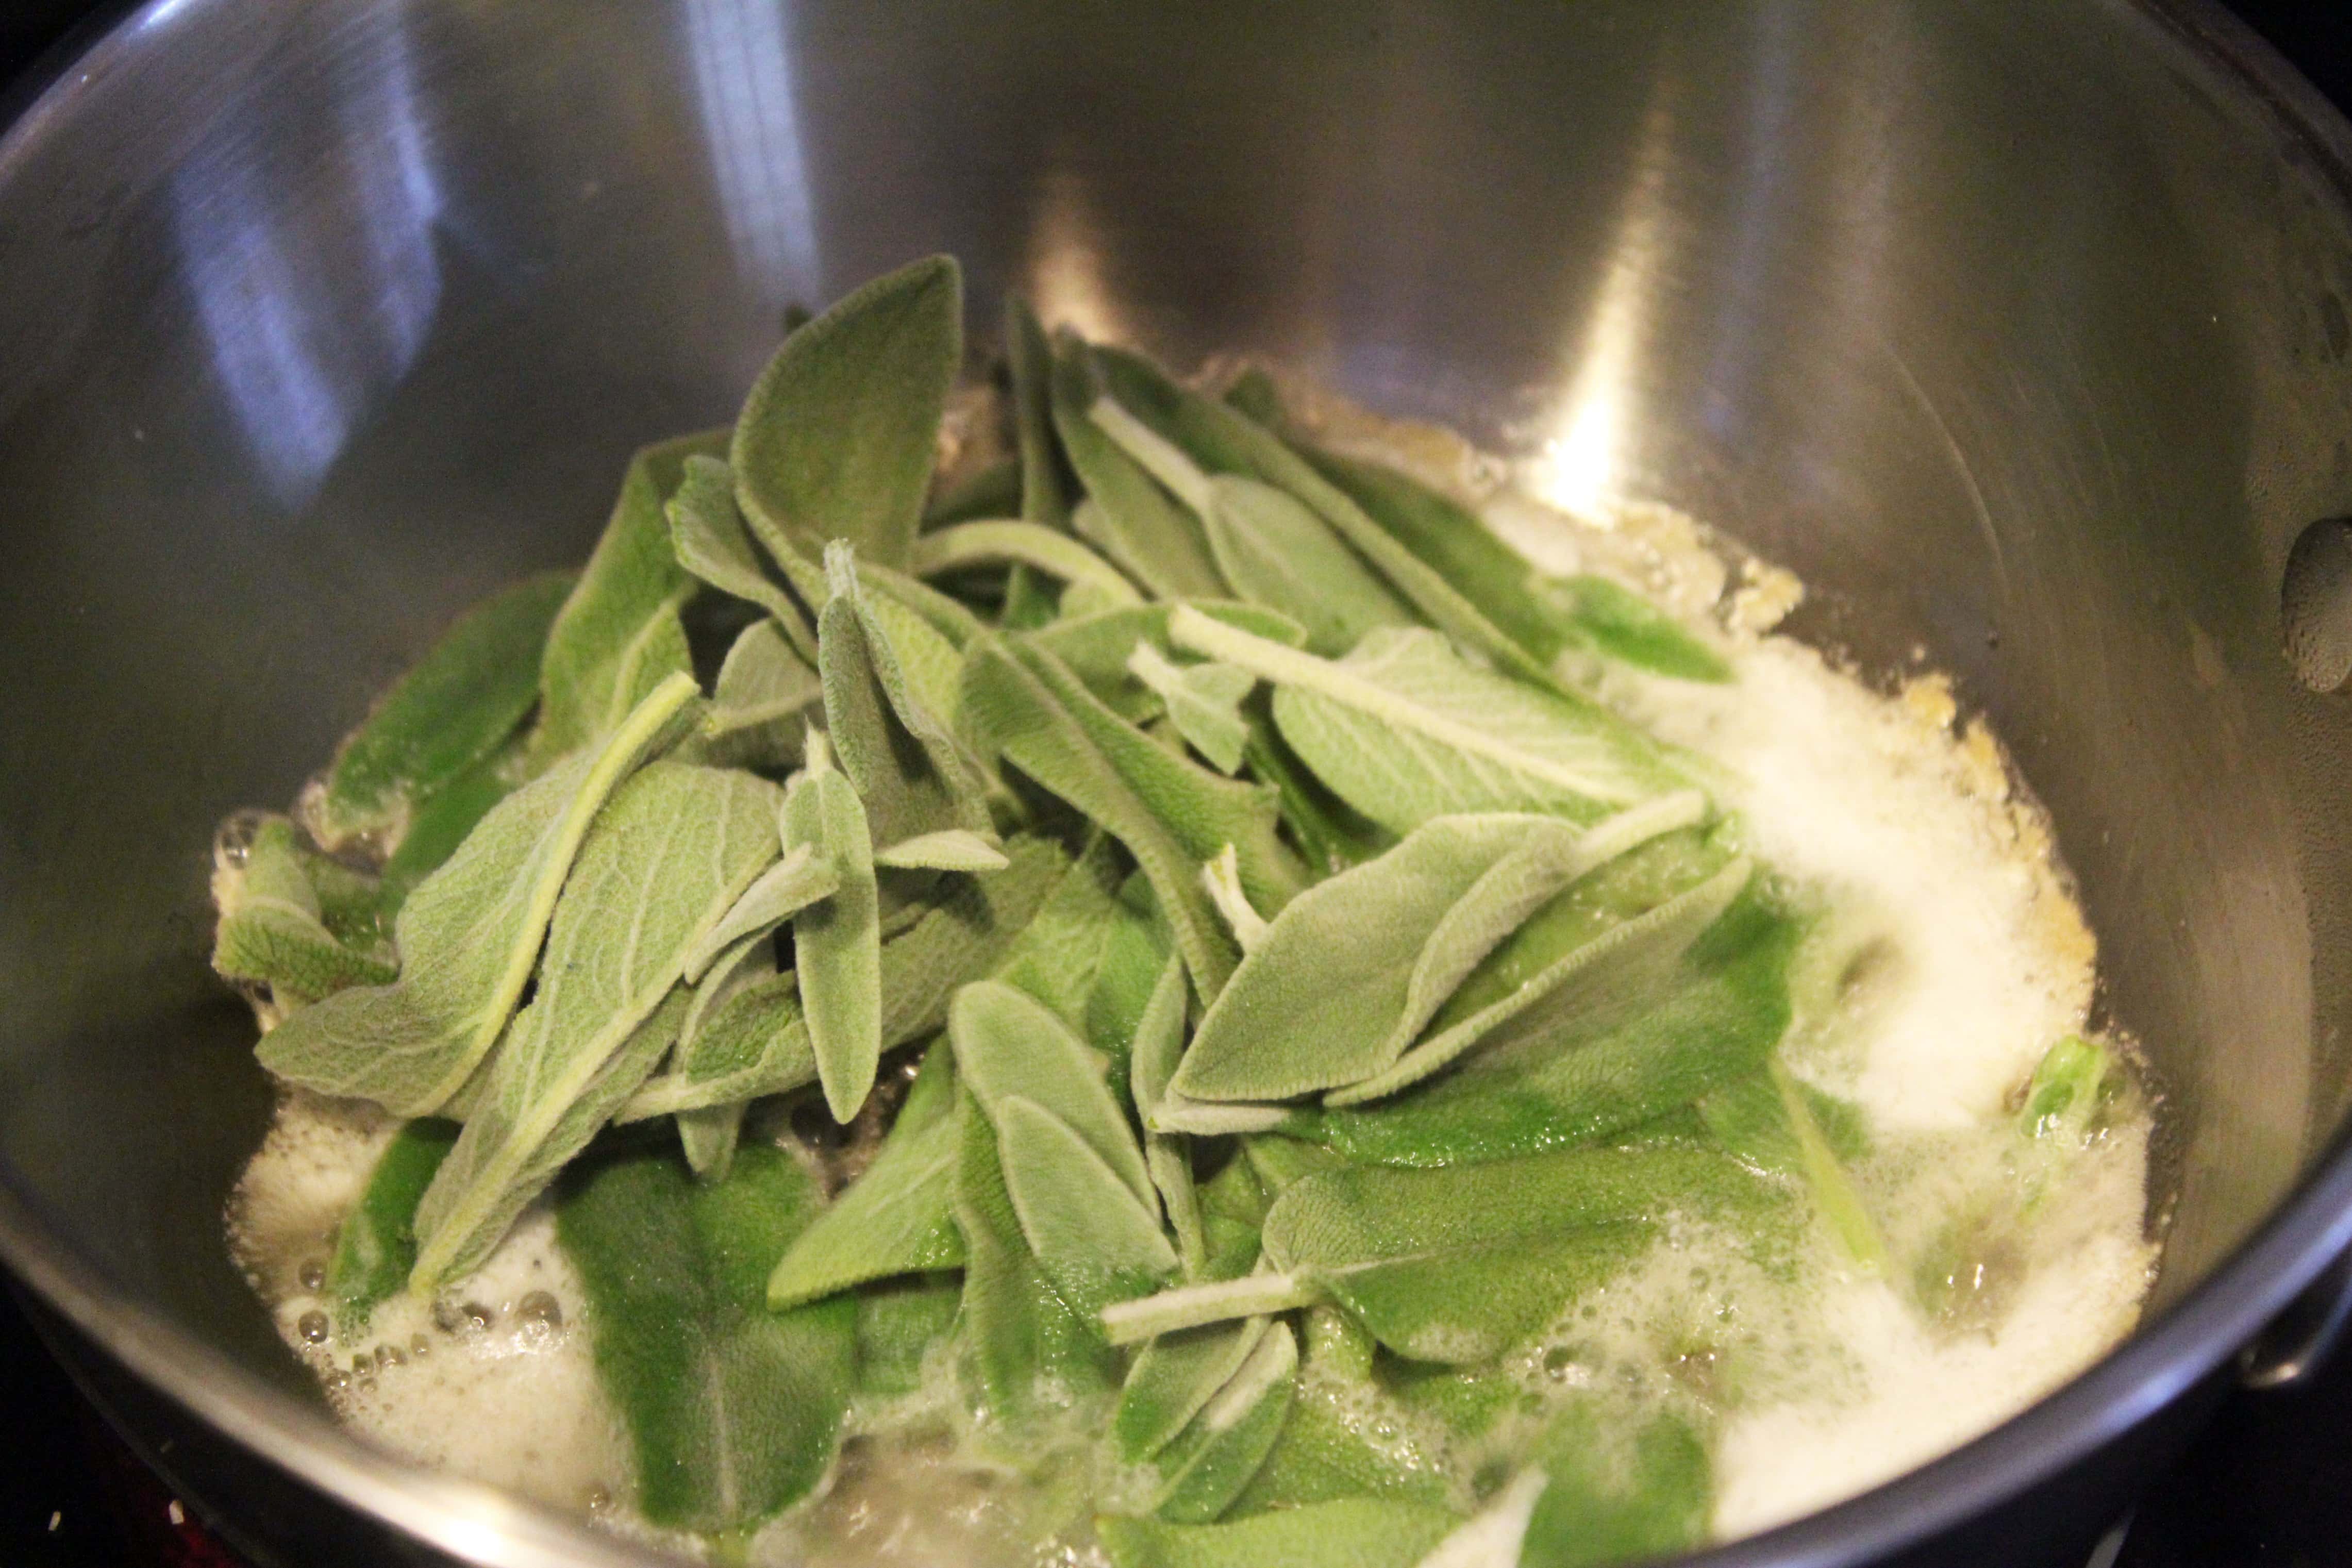 Start sage leaves with butter